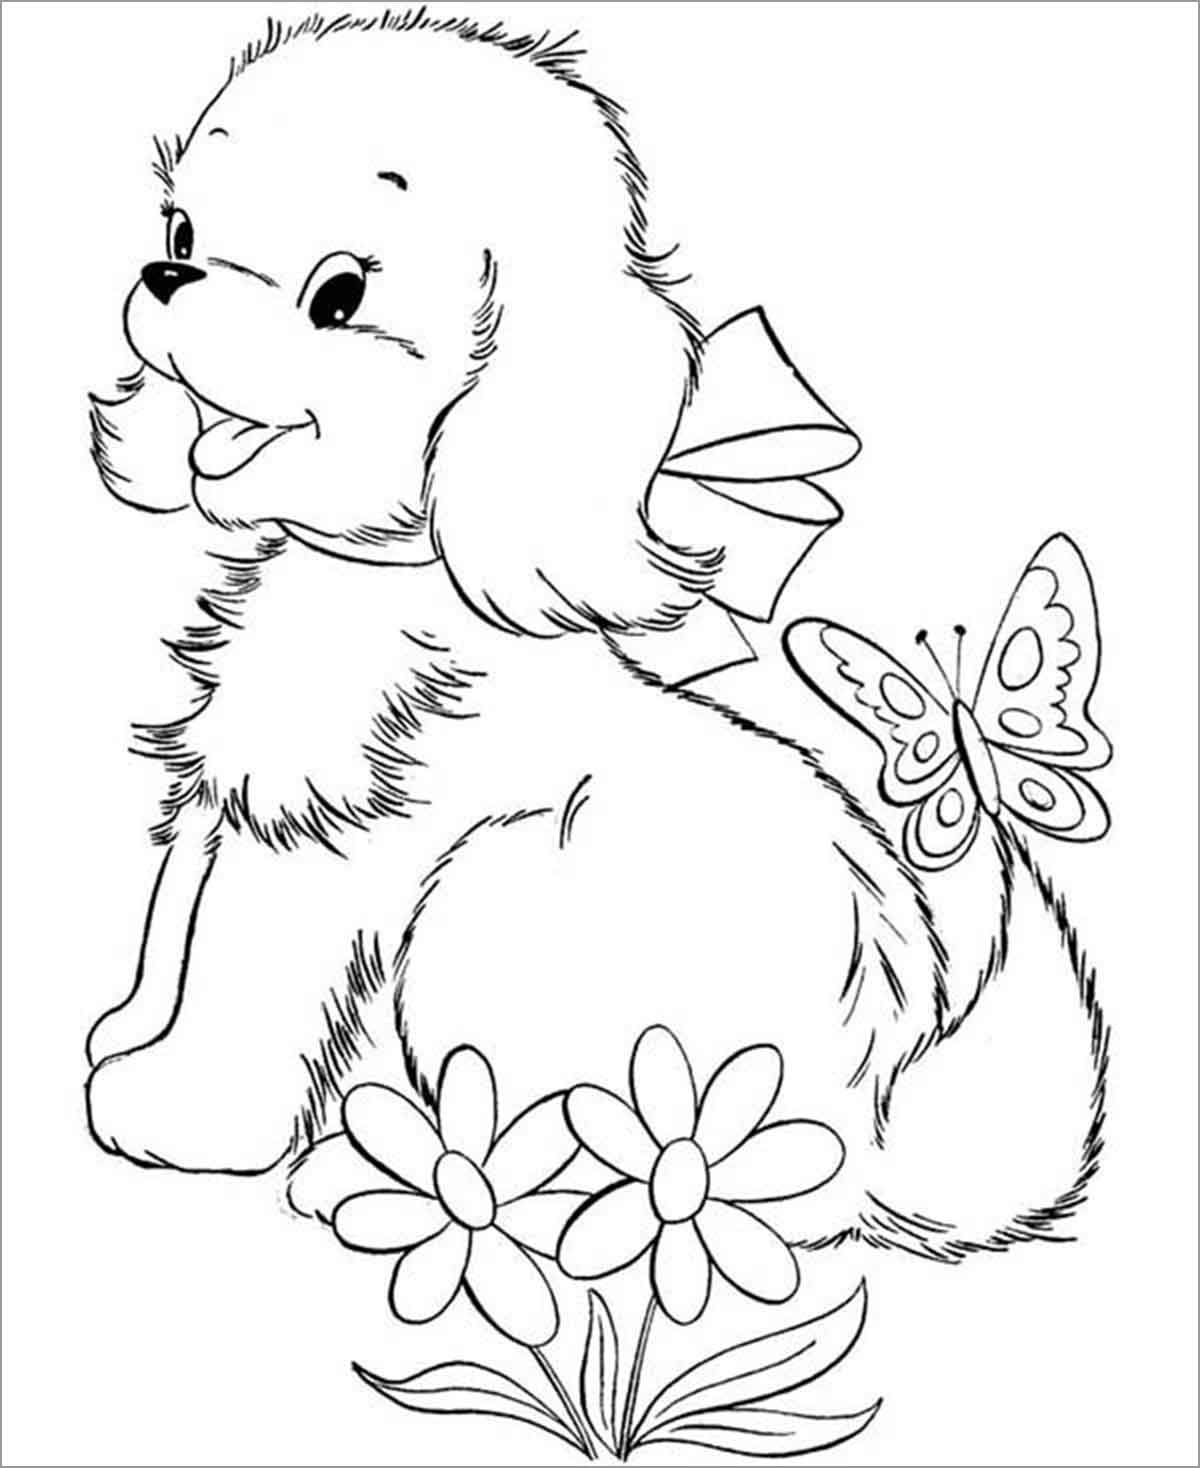 White Admiral butterfly Coloring Page - ColoringBay